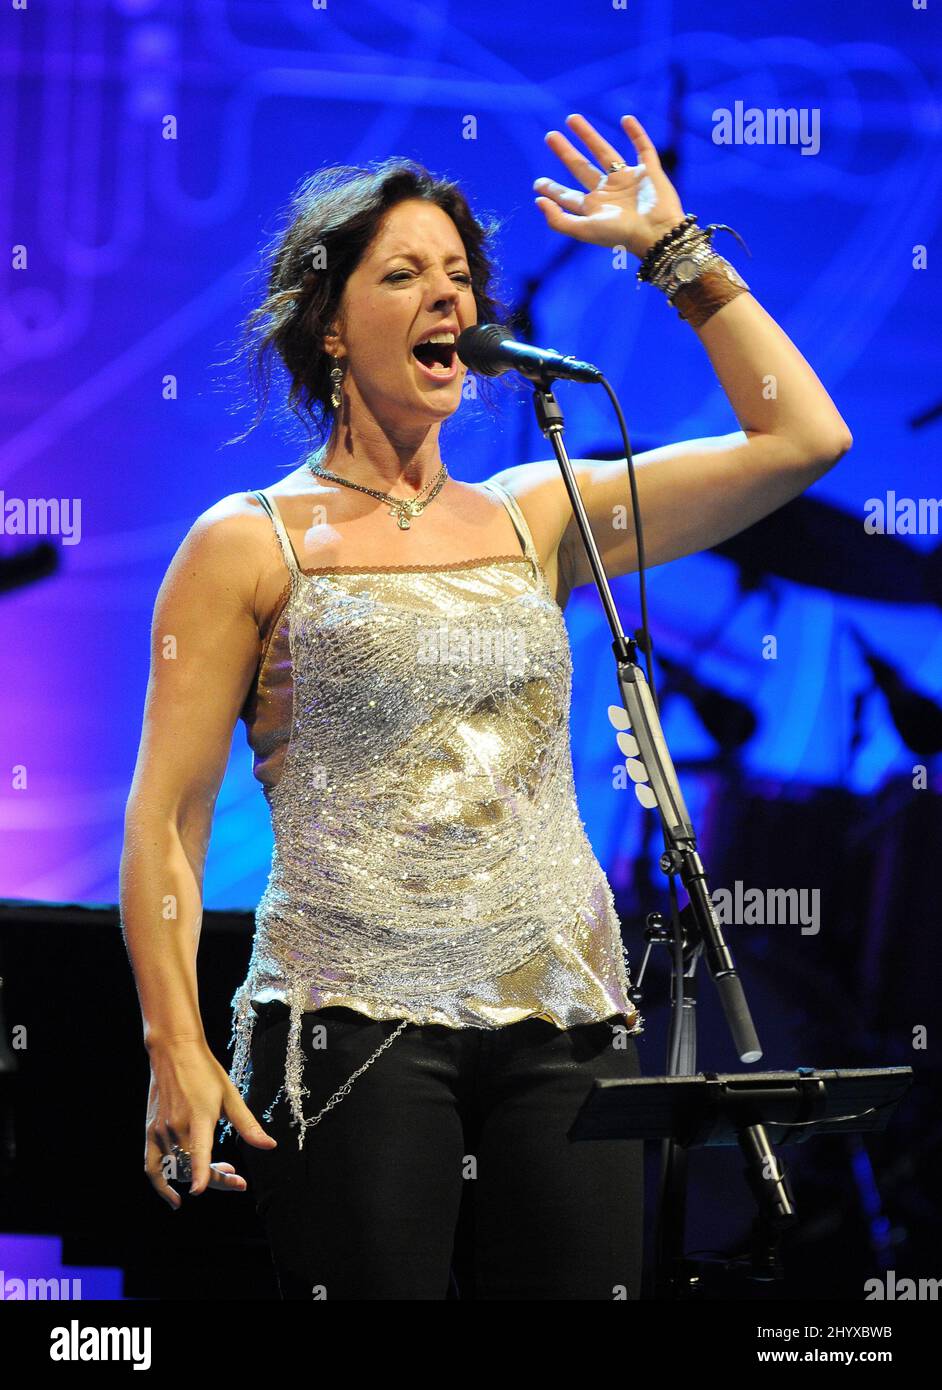 Sarah McLachlan performs at Lilith Fair Celebration of Women in Music at the Verizon Wireless Amphitheater in Irvine in California, USA. Stock Photo